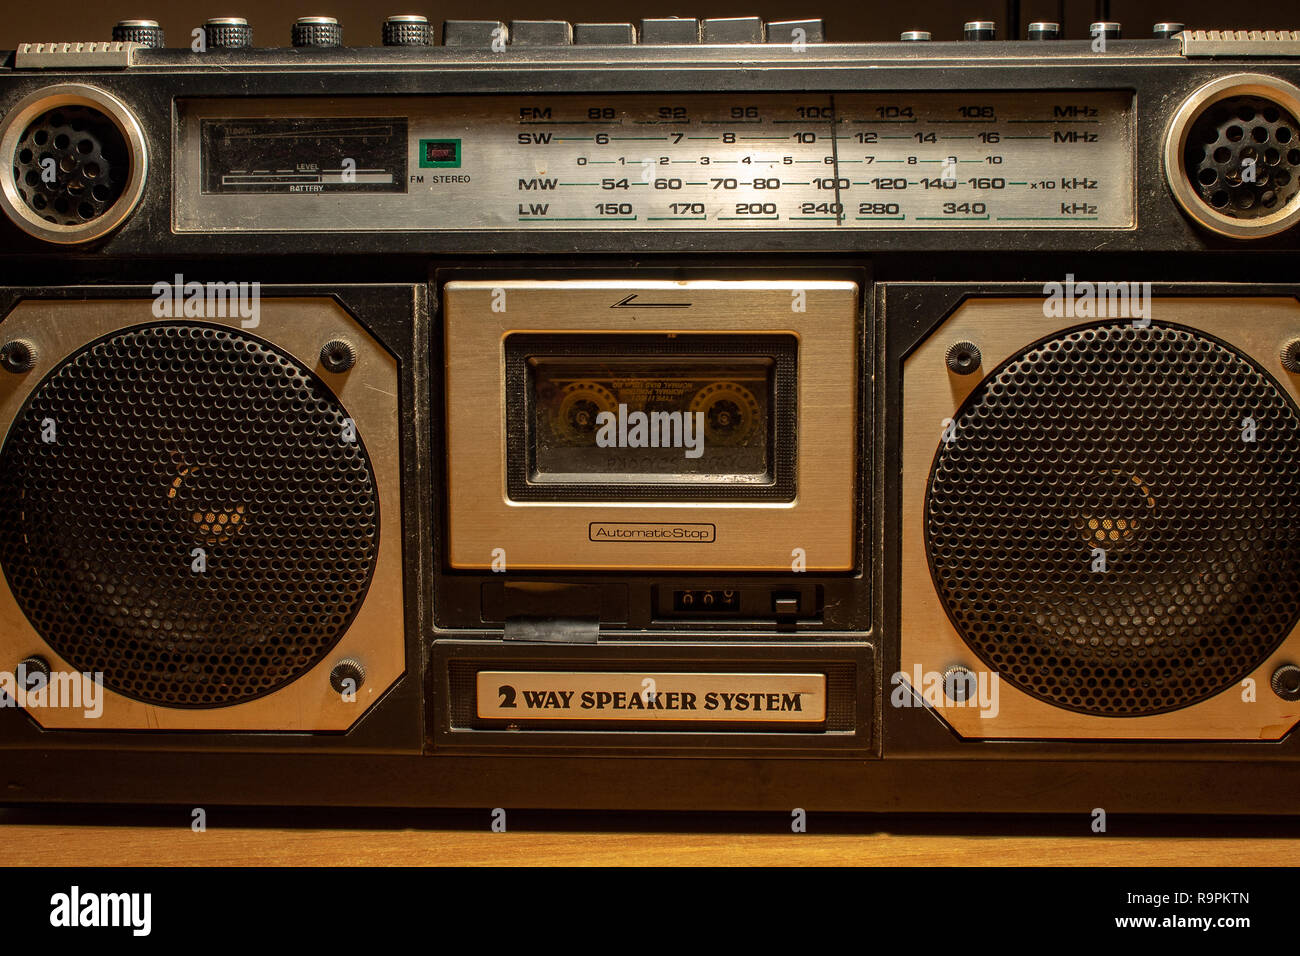 In the 70s and 80s the music was listened to through the cassettes, a  magnetic storage device. The radios were very large, containing two  speakers Stock Photo - Alamy